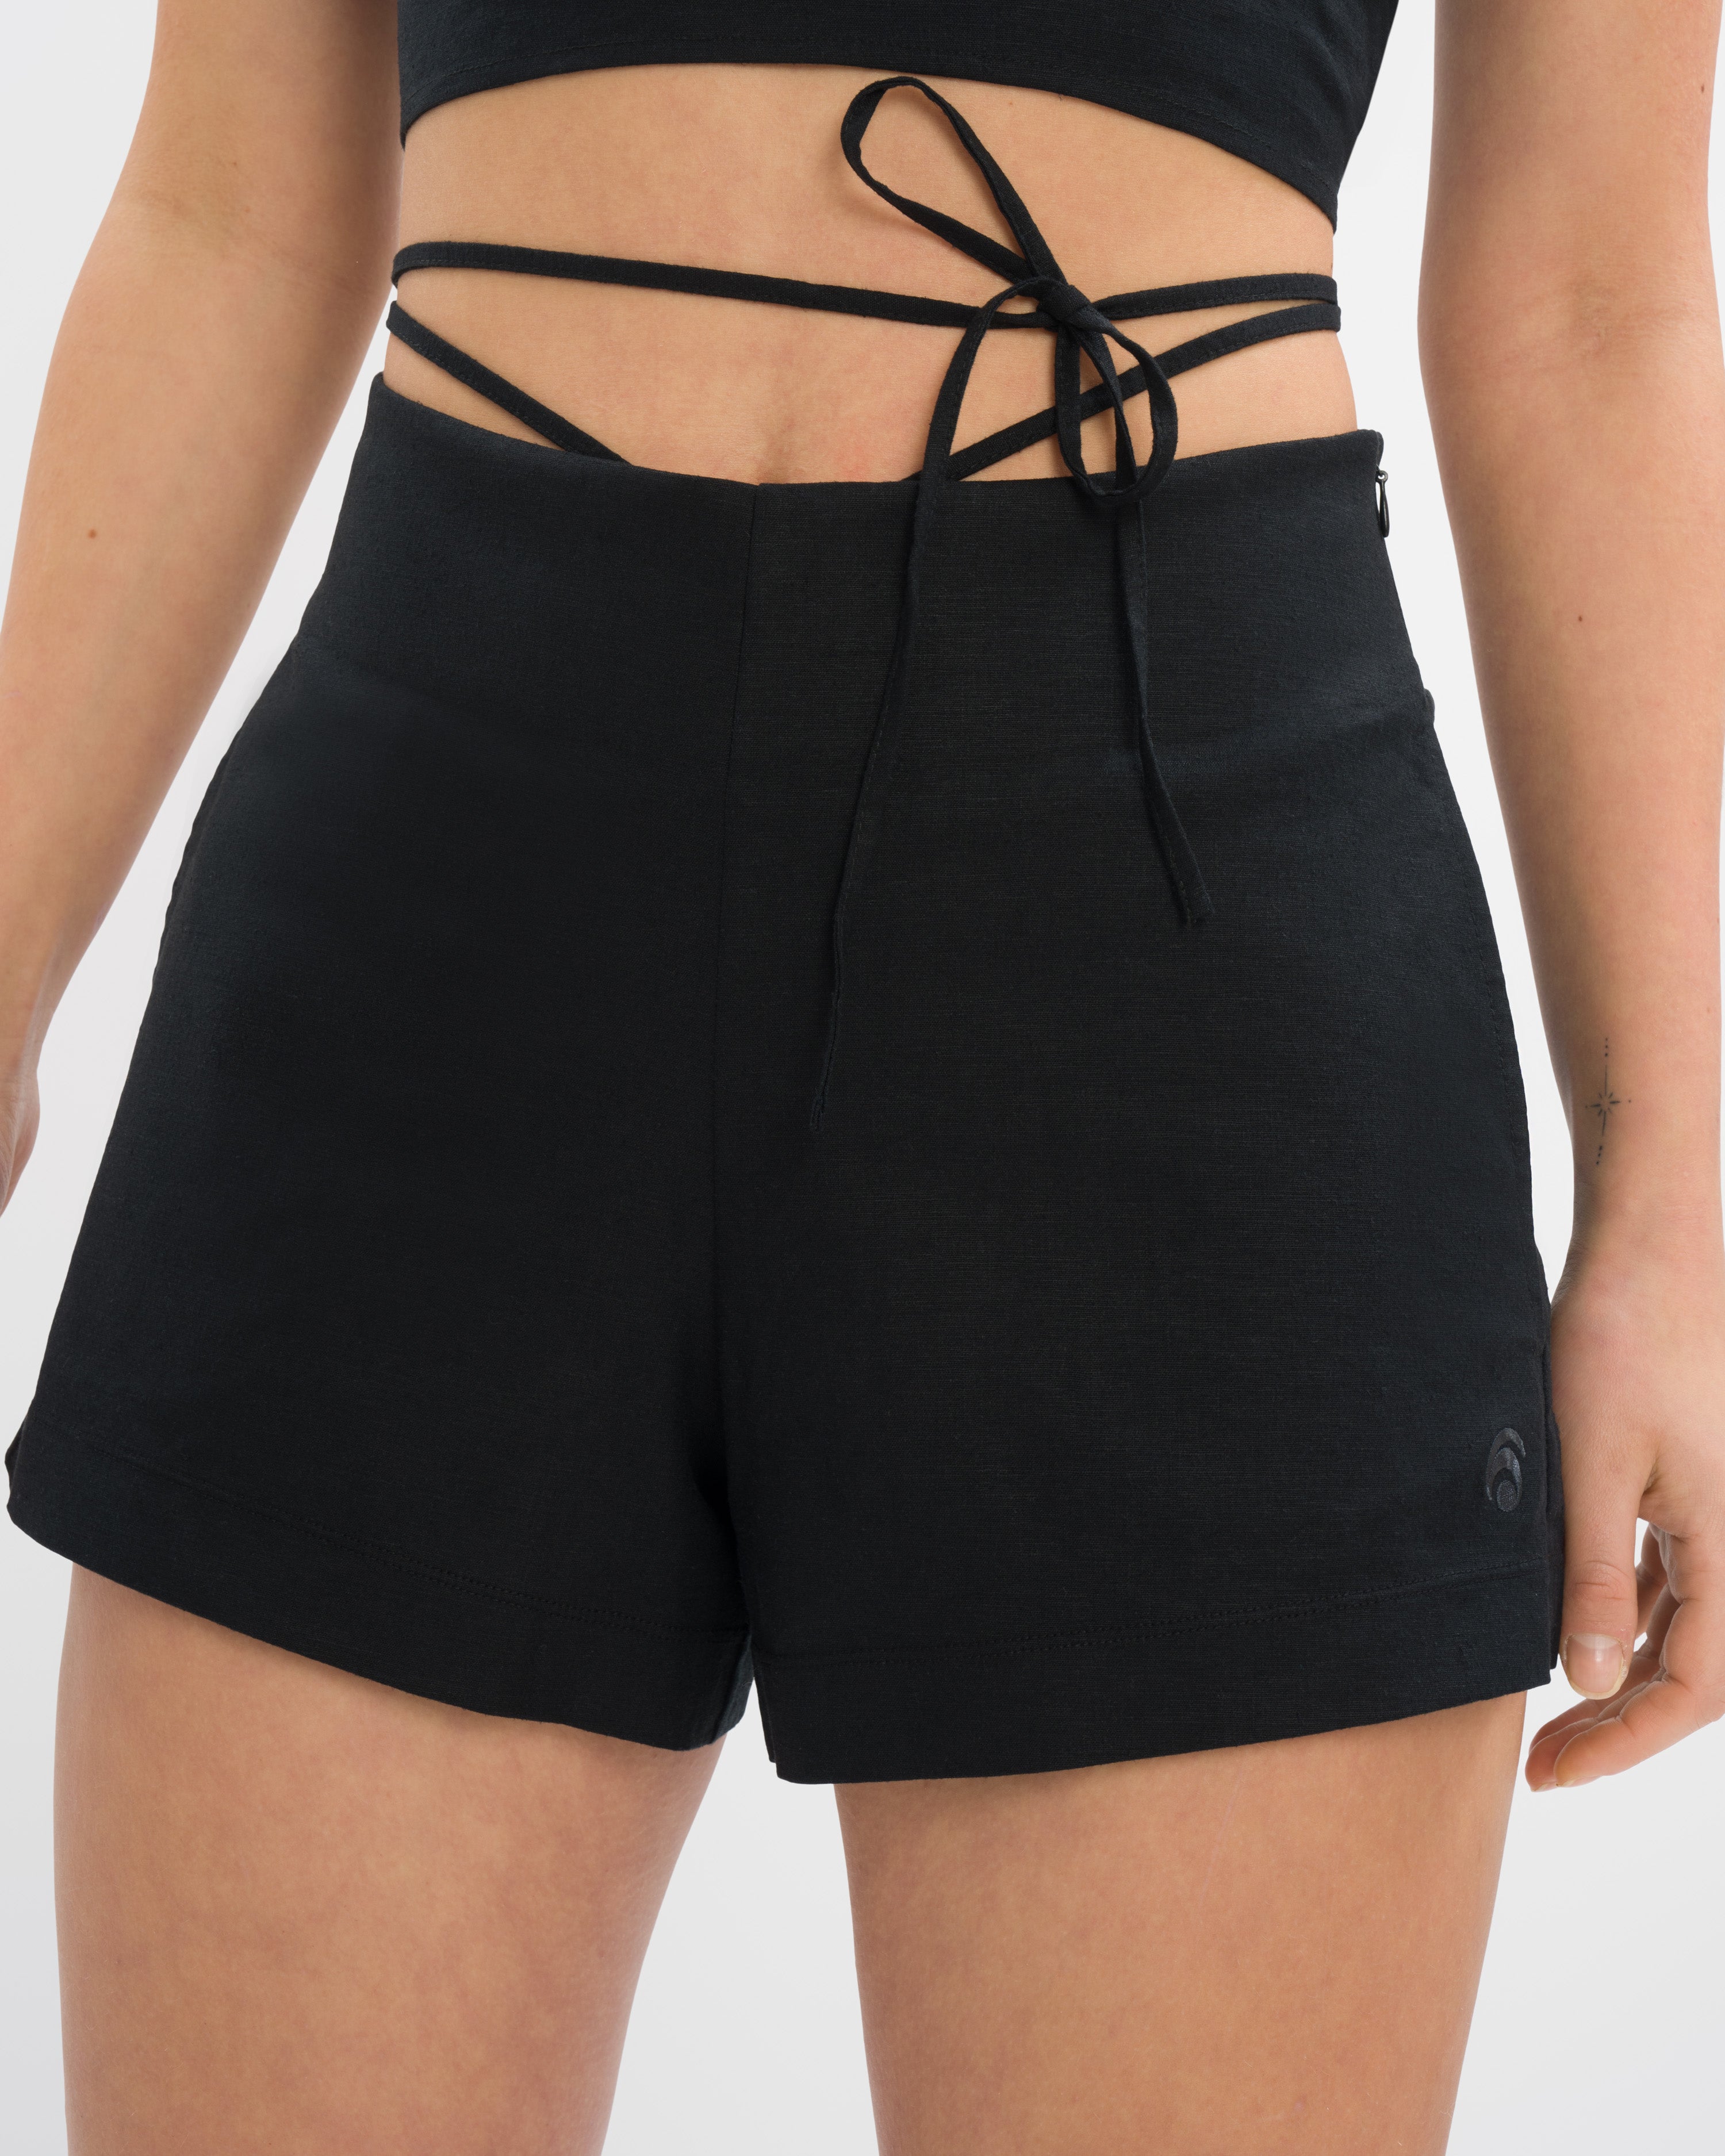 Lily Short Set Deluxe - Black